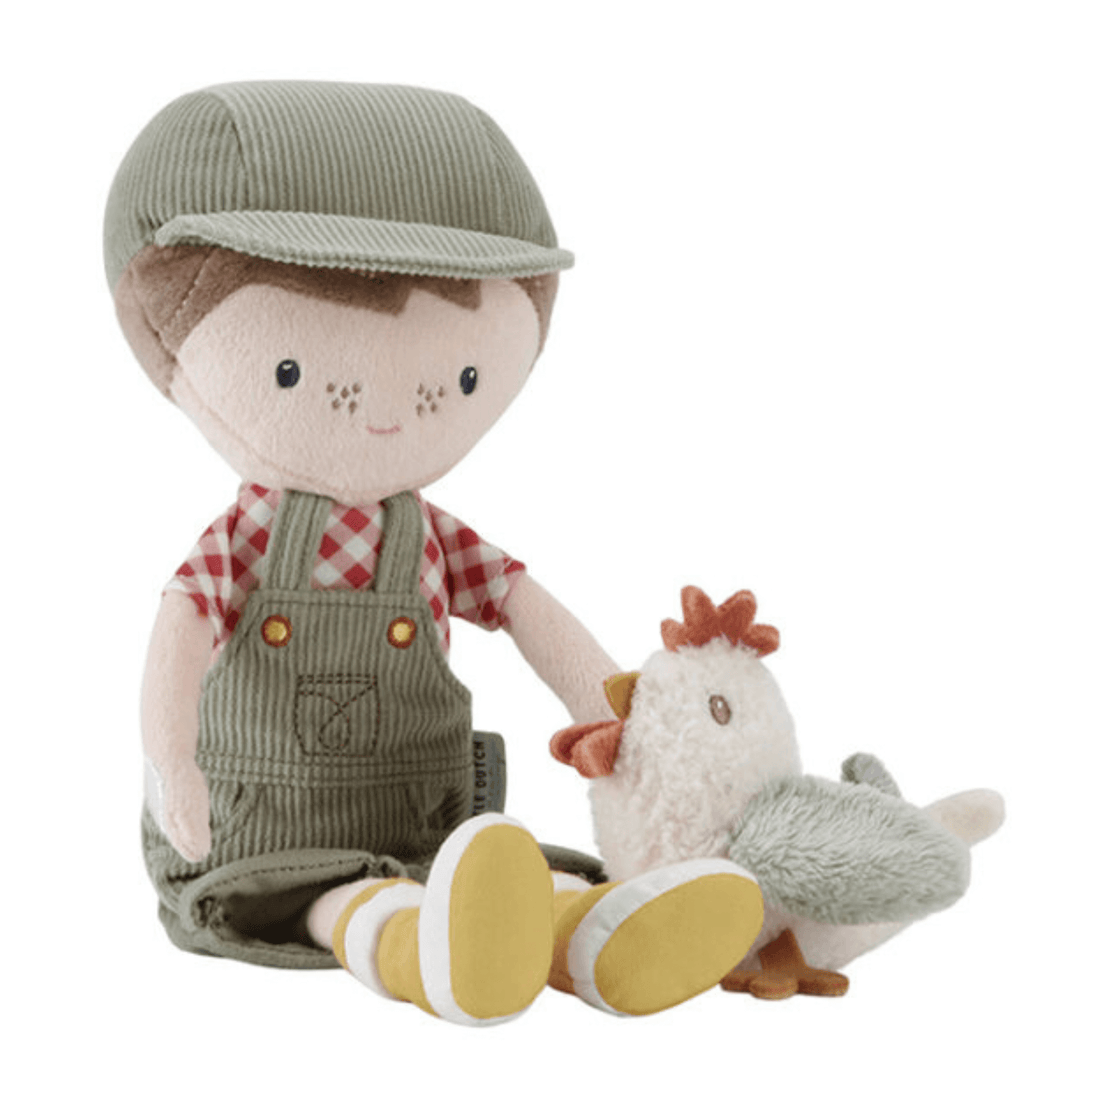 Doll - Farmer Jim with a chicken